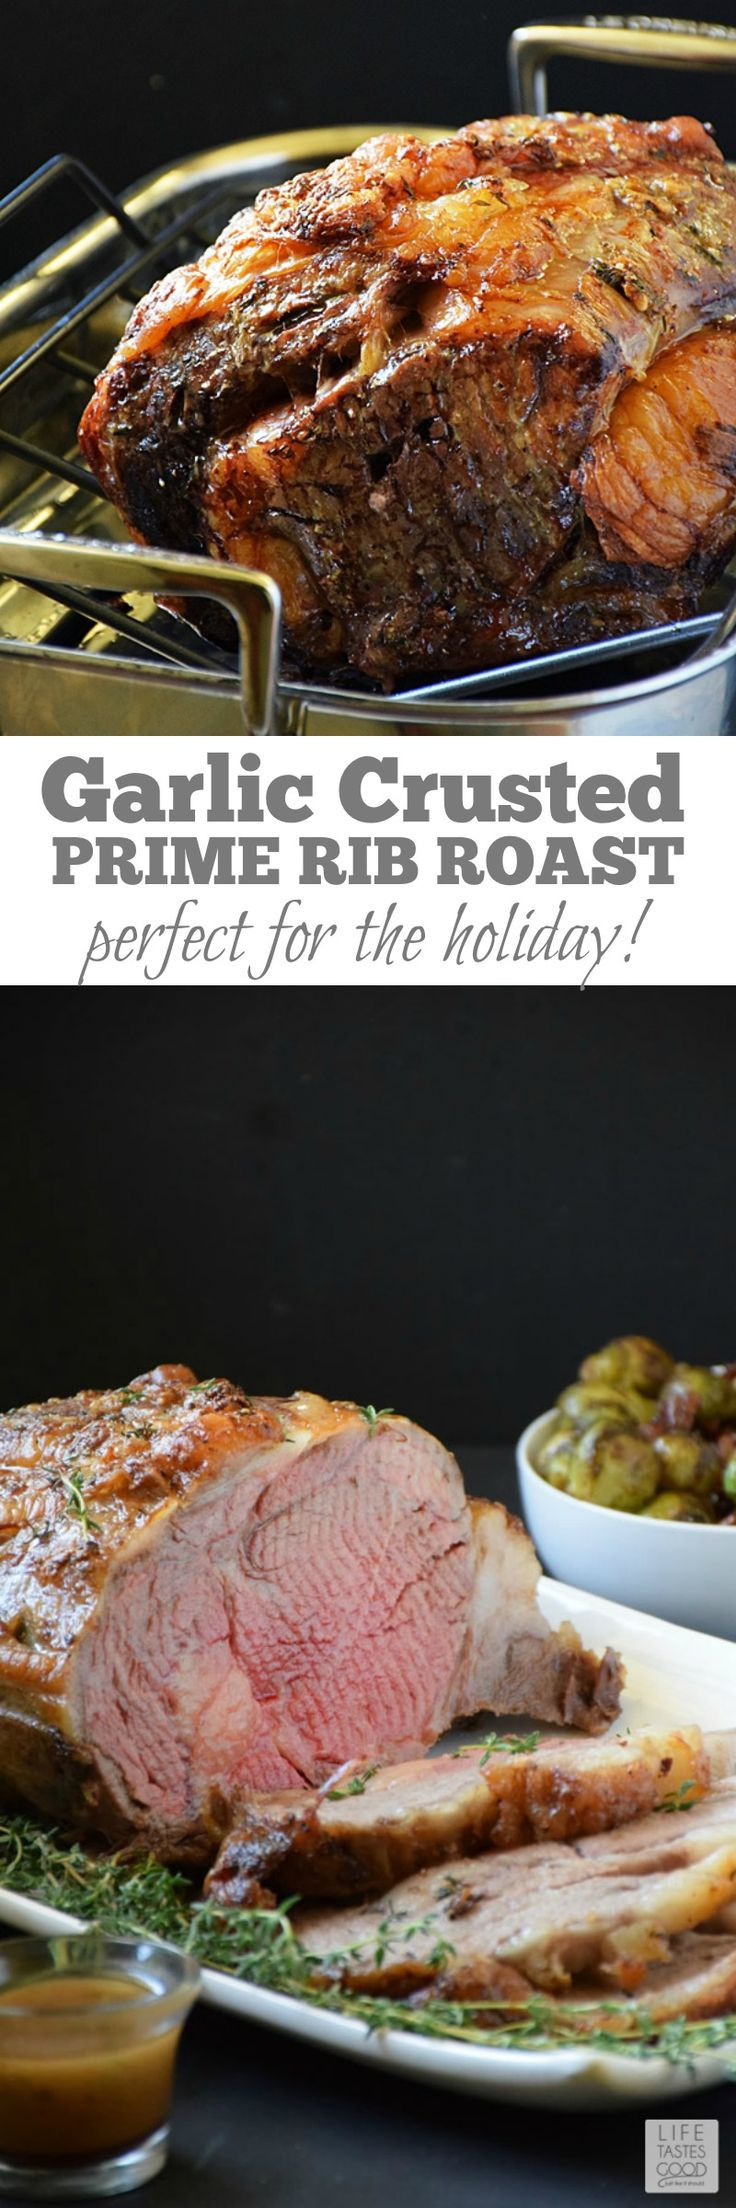 Side Dishes For Prime Rib Christmas
 The top 21 Ideas About Side Dishes for Prime Rib Dinner